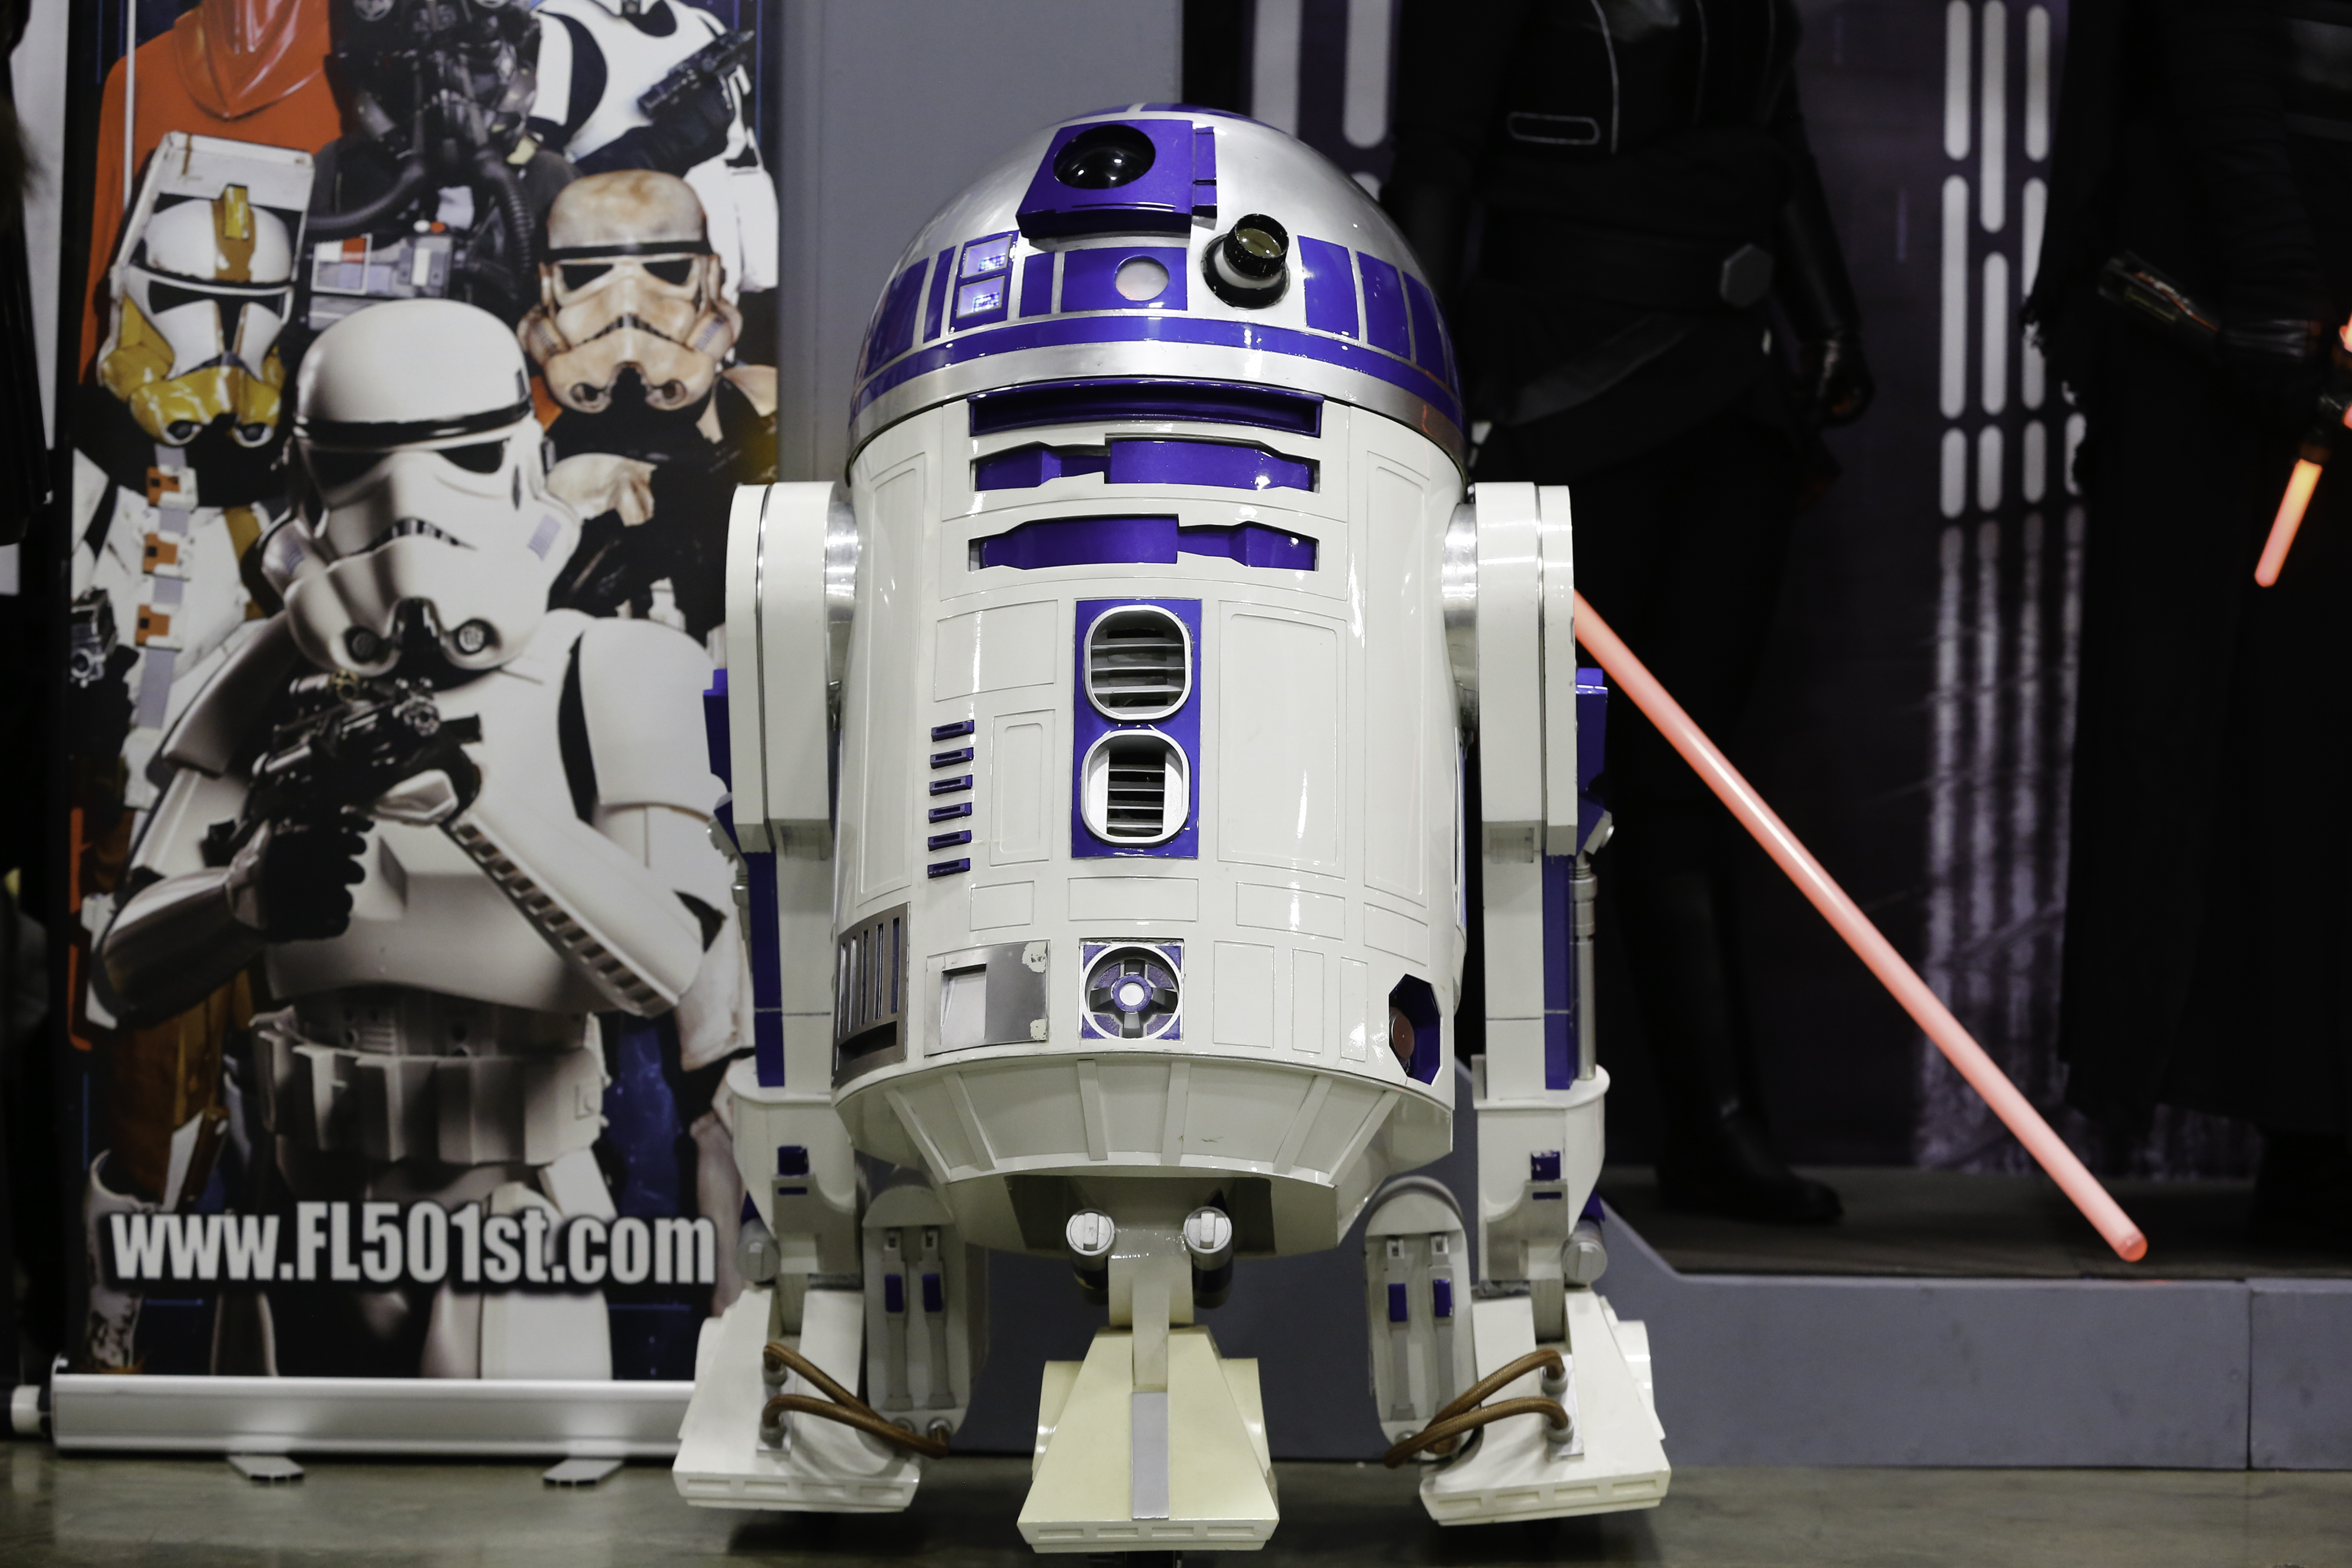 A replica of R2-D2 from Star Wars.